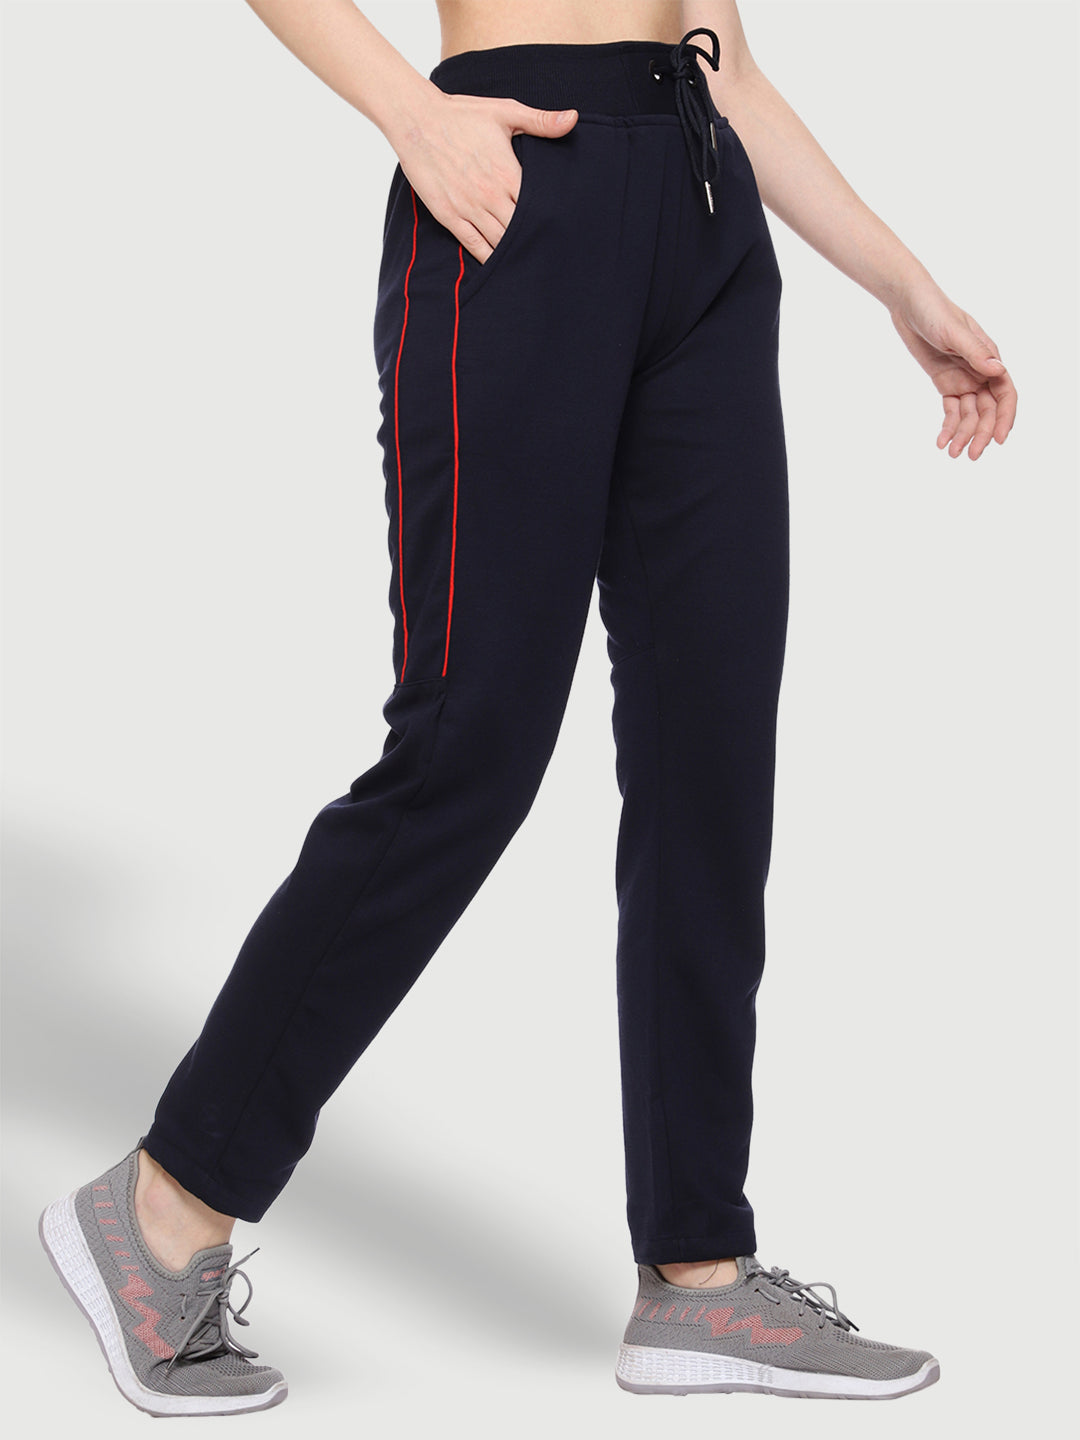 Women's Slim Fit Poly Cotton Track Pants in Latur at best price by Newsun  Innovaation - Justdial